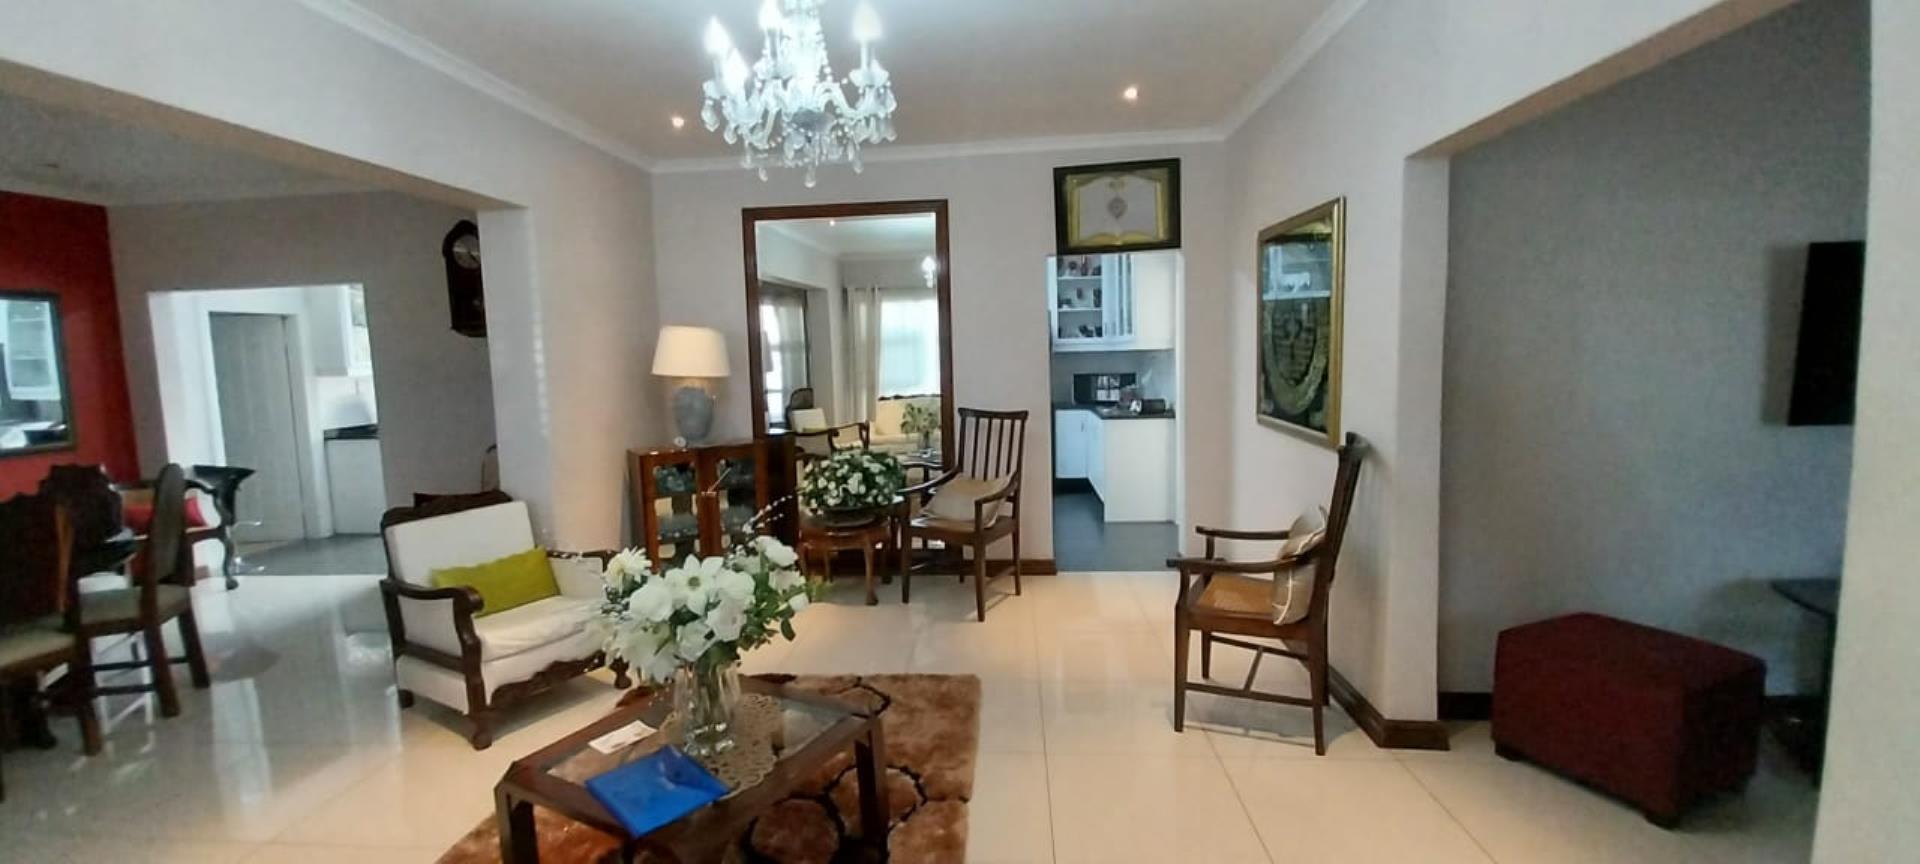 4 Bedroom  House for Sale in Cape Town - Western Cape